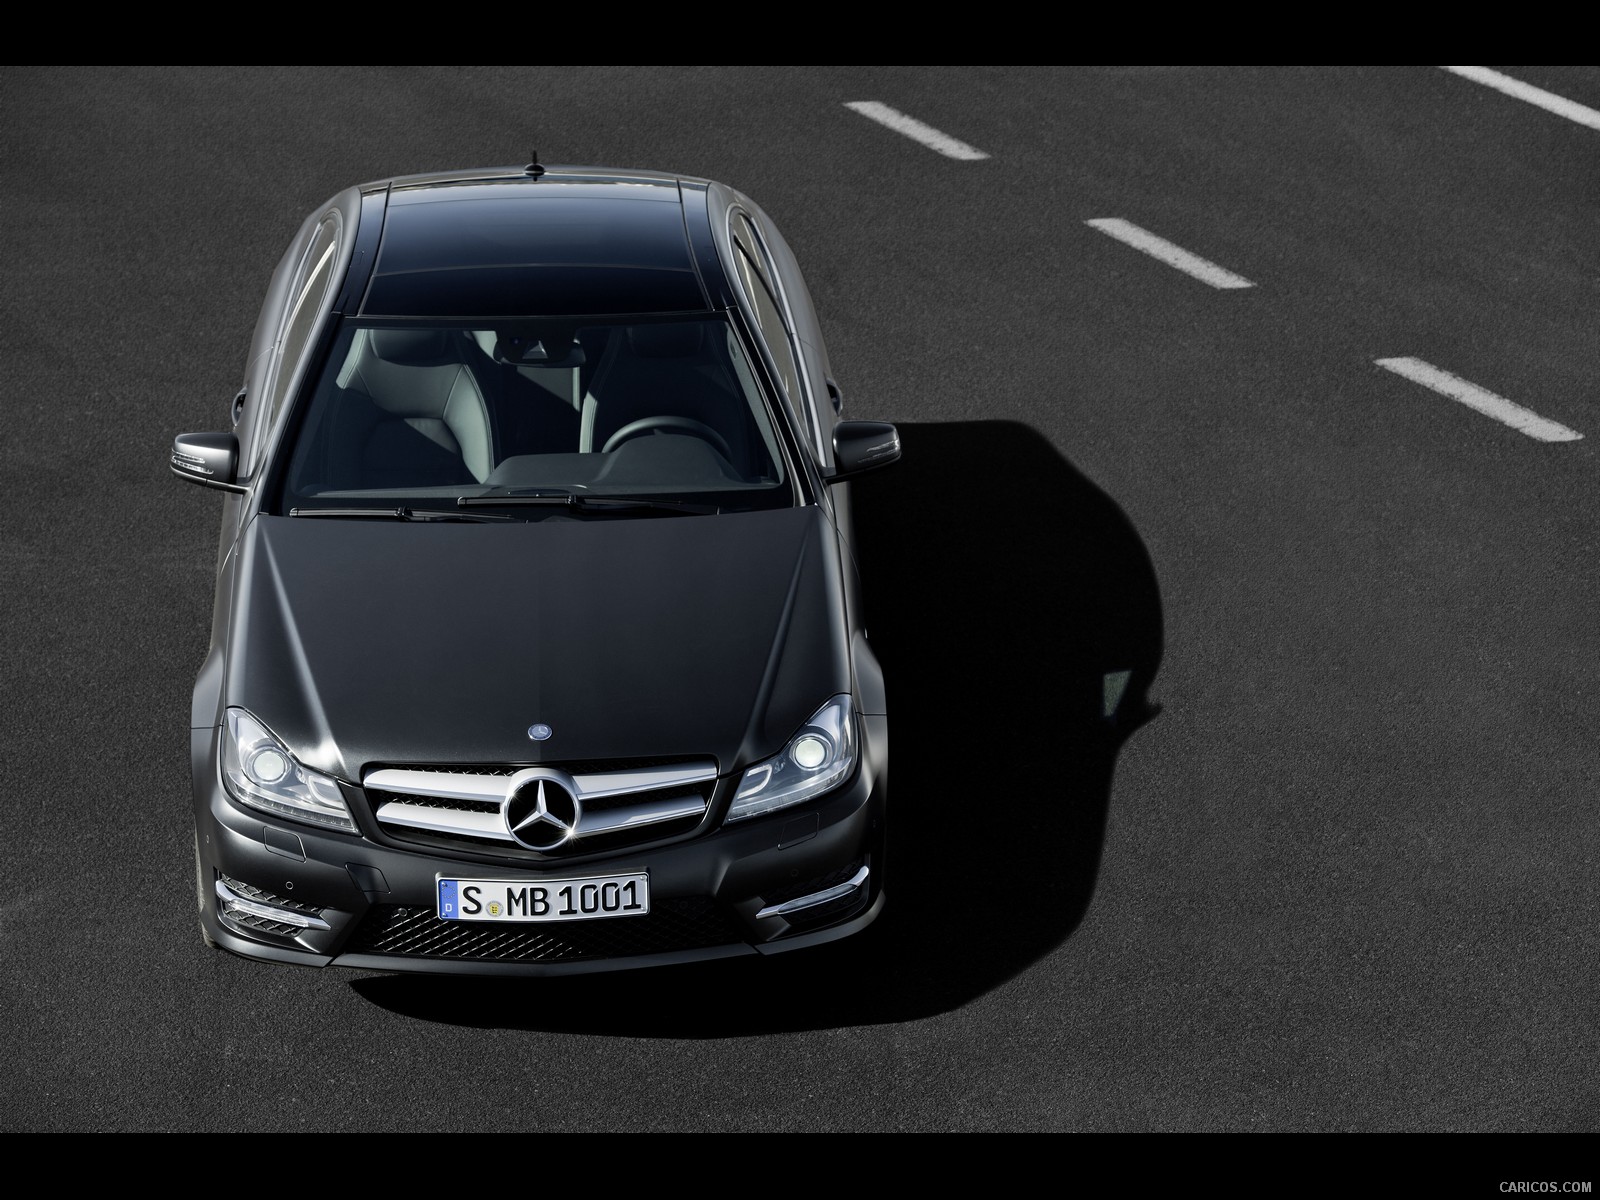 Mercedes-Benz C-Class Coupe (2012)  - Top, #5 of 79